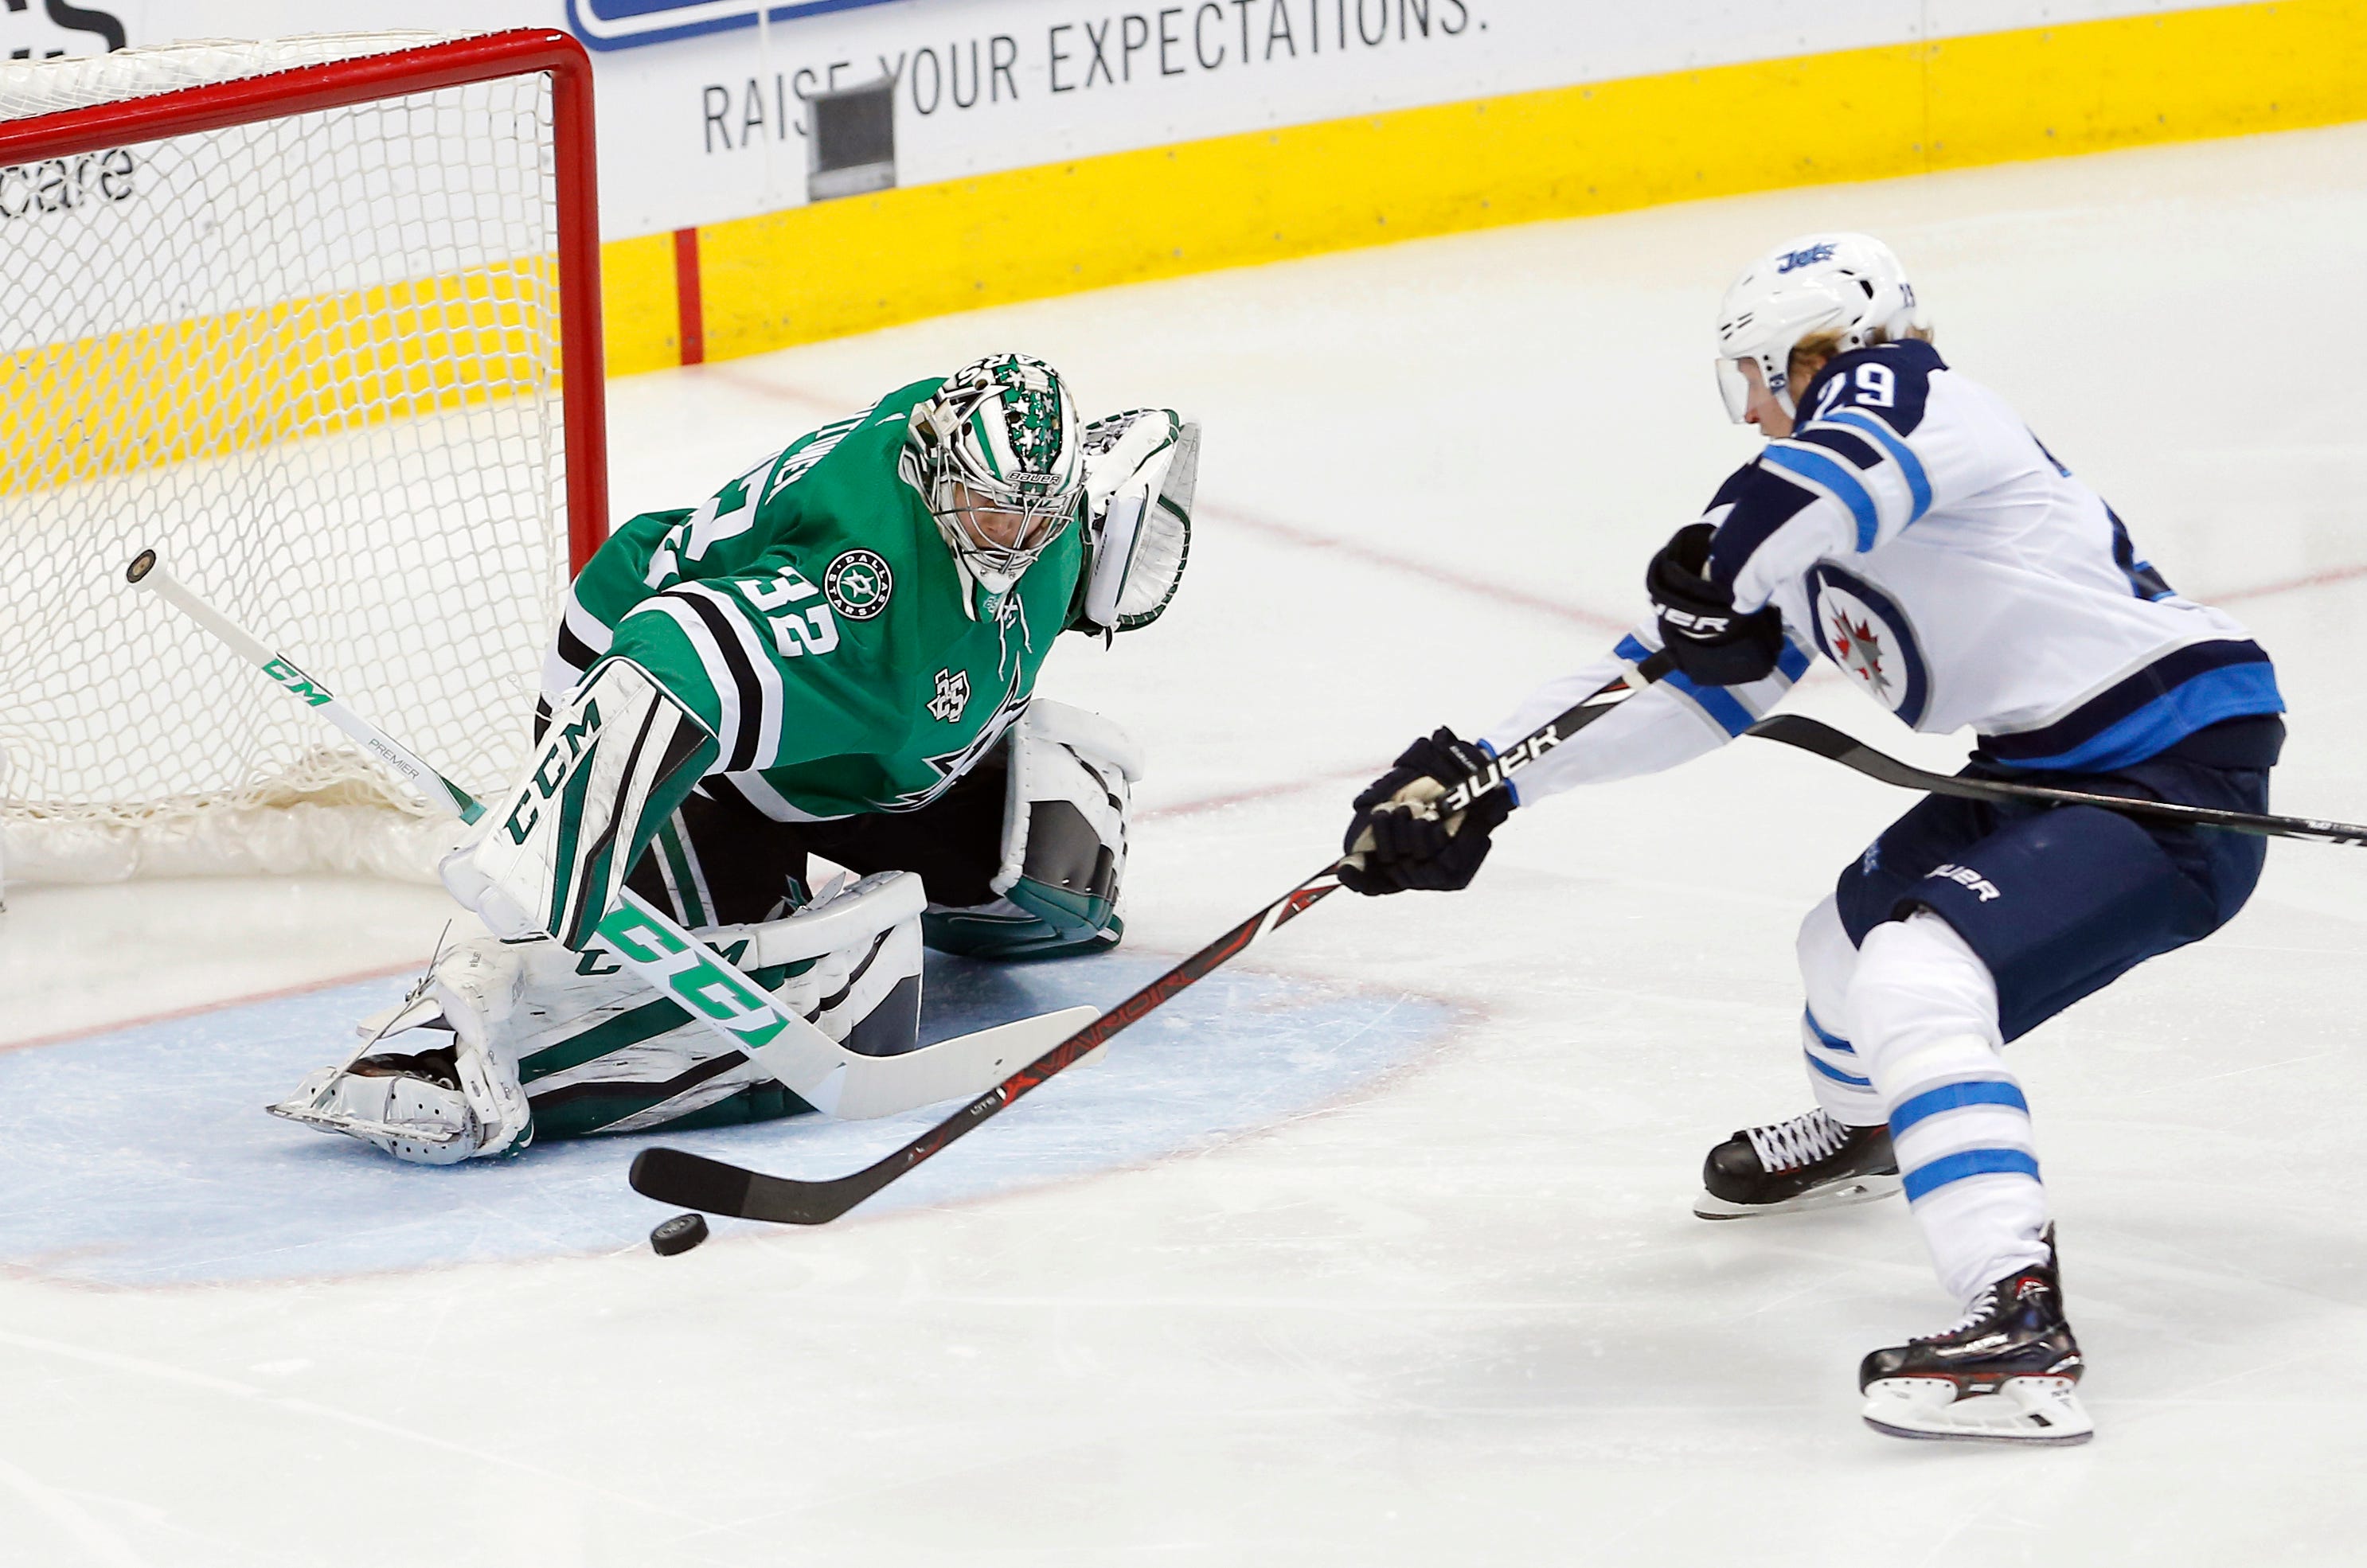 Laine scores twice, Jets beat Stars to tie for Central lead